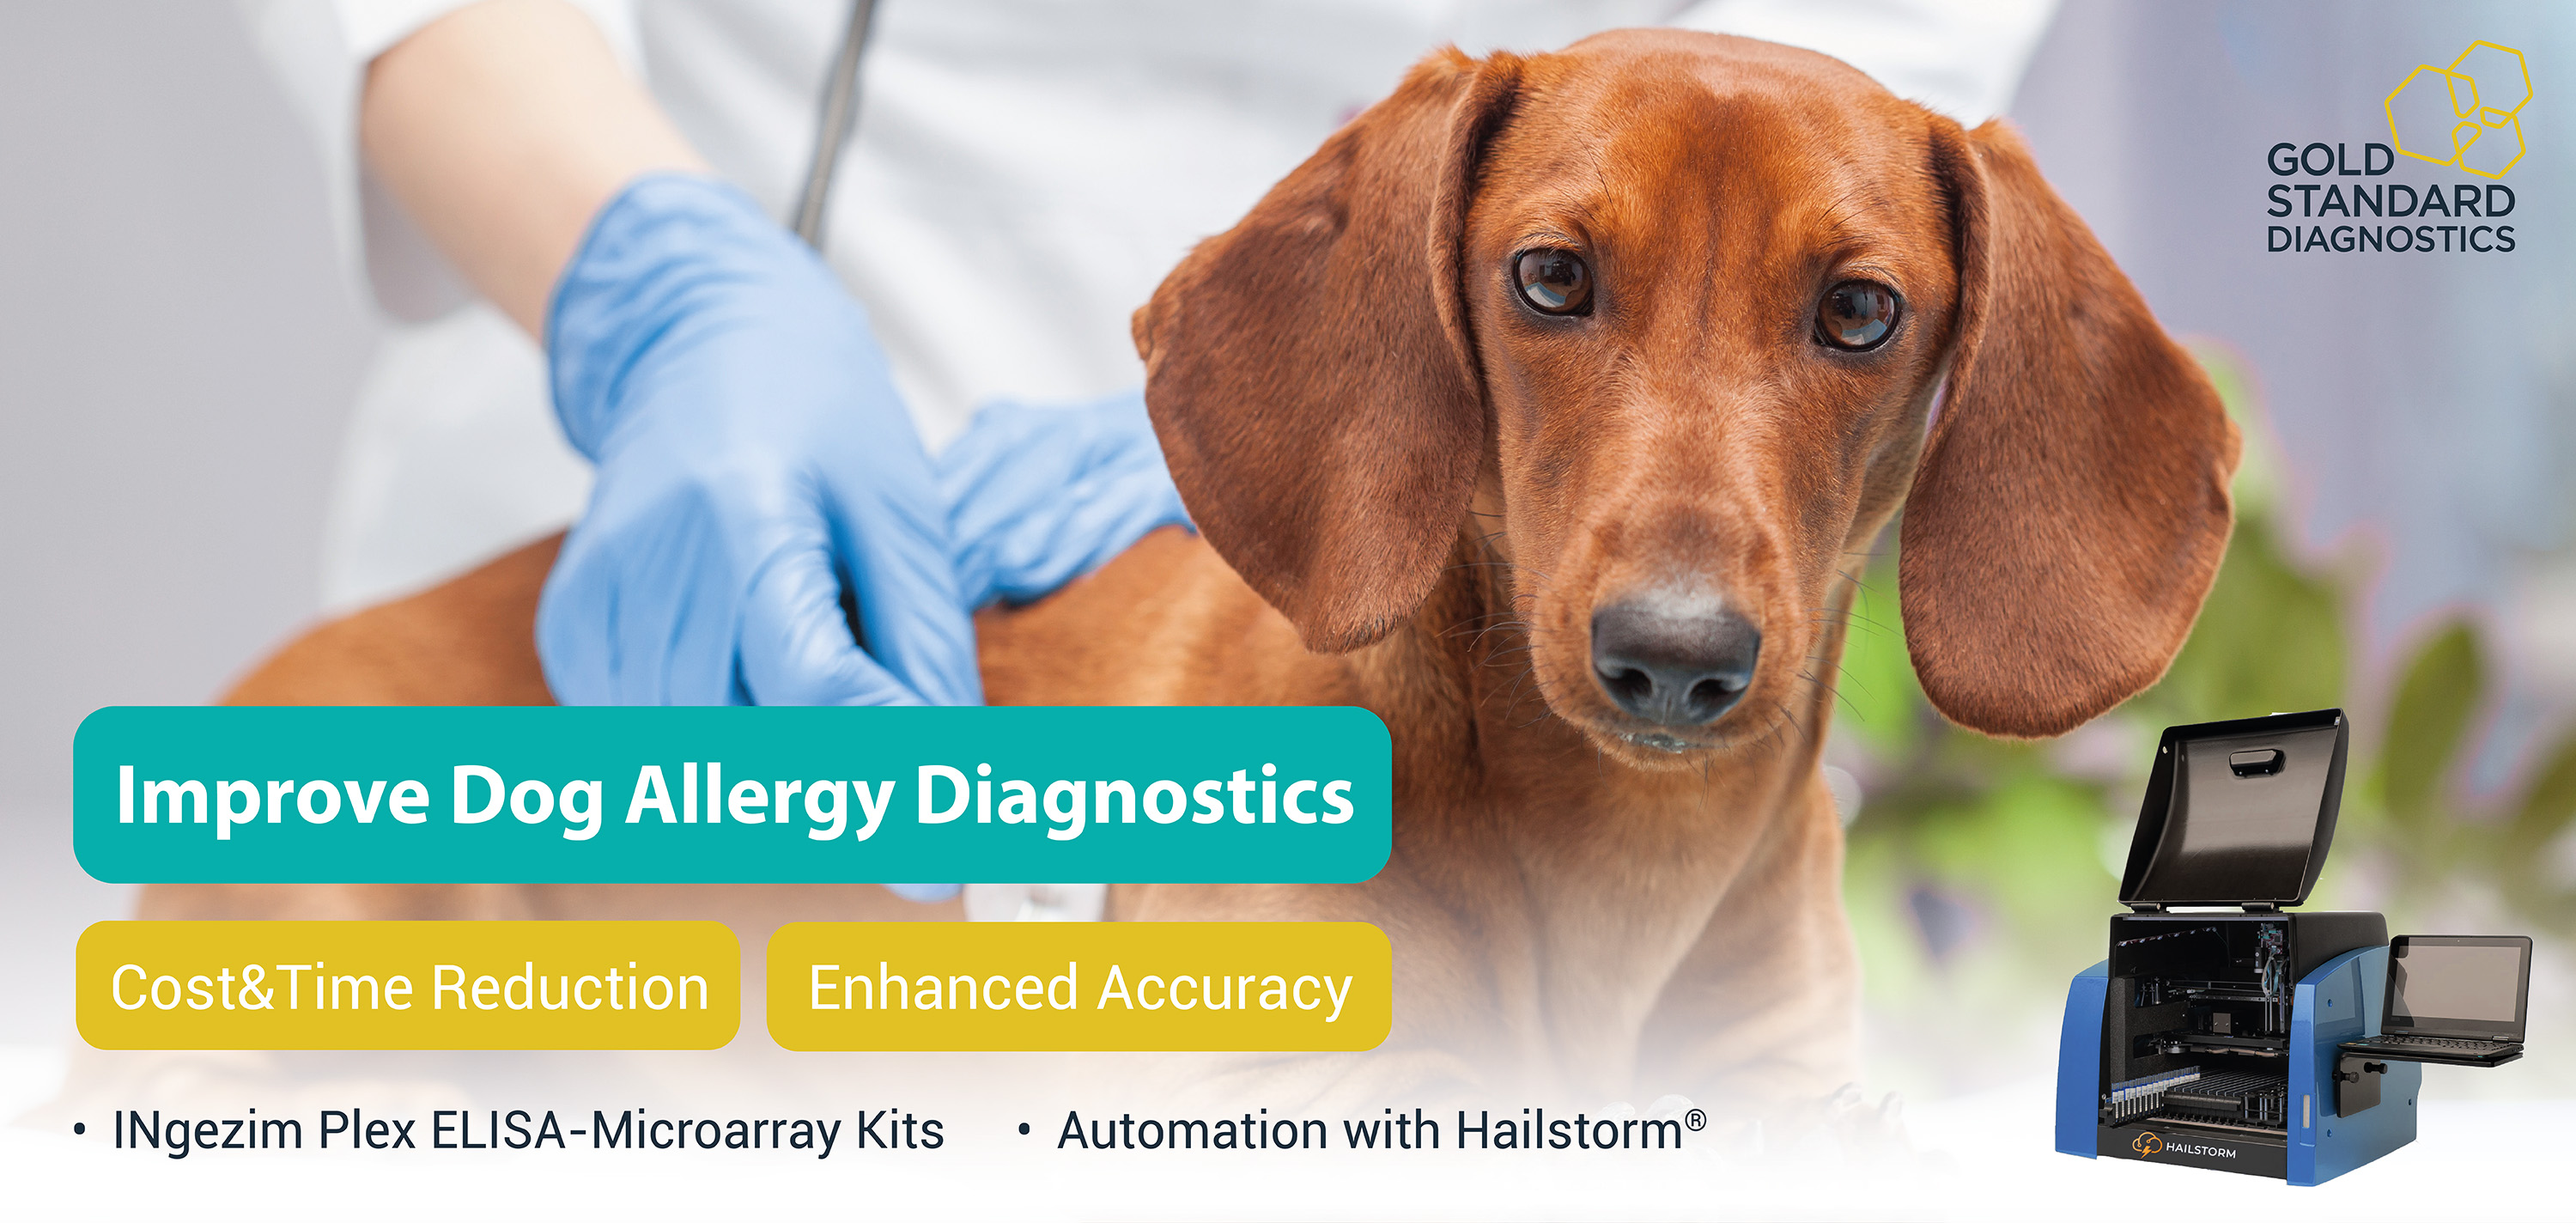 Reduce costs and improve accuracy in canine allergy diagnostics, applying a solution including INgezim PLEX reagents and automation with Hailstorm! 